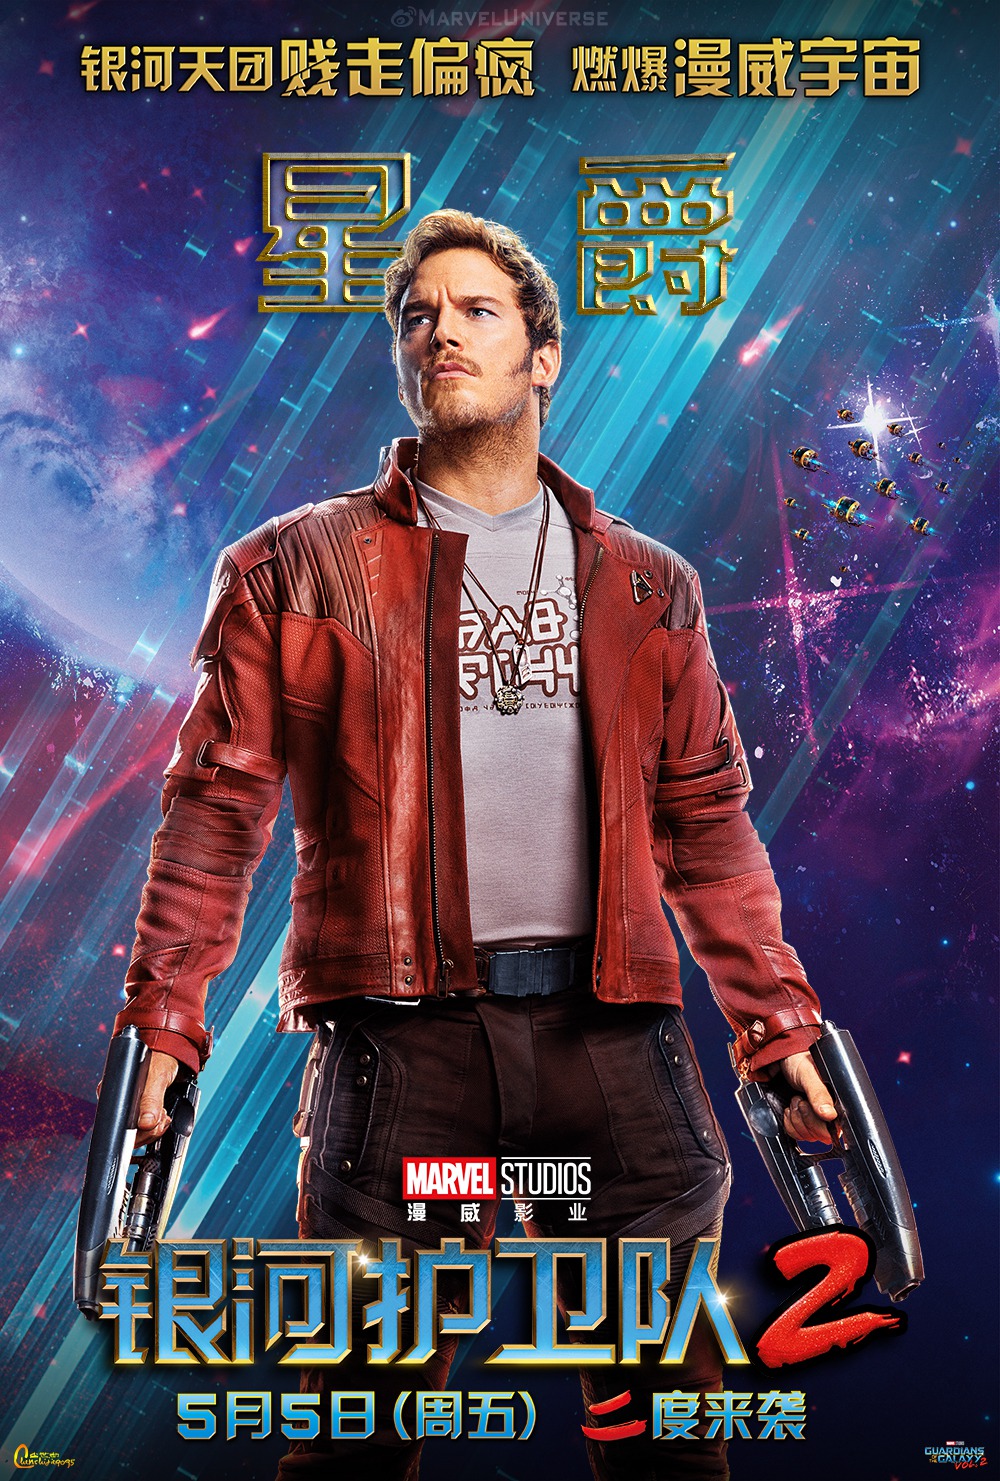 Extra Large Movie Poster Image for Guardians of the Galaxy Vol. 2 (#37 of 45)